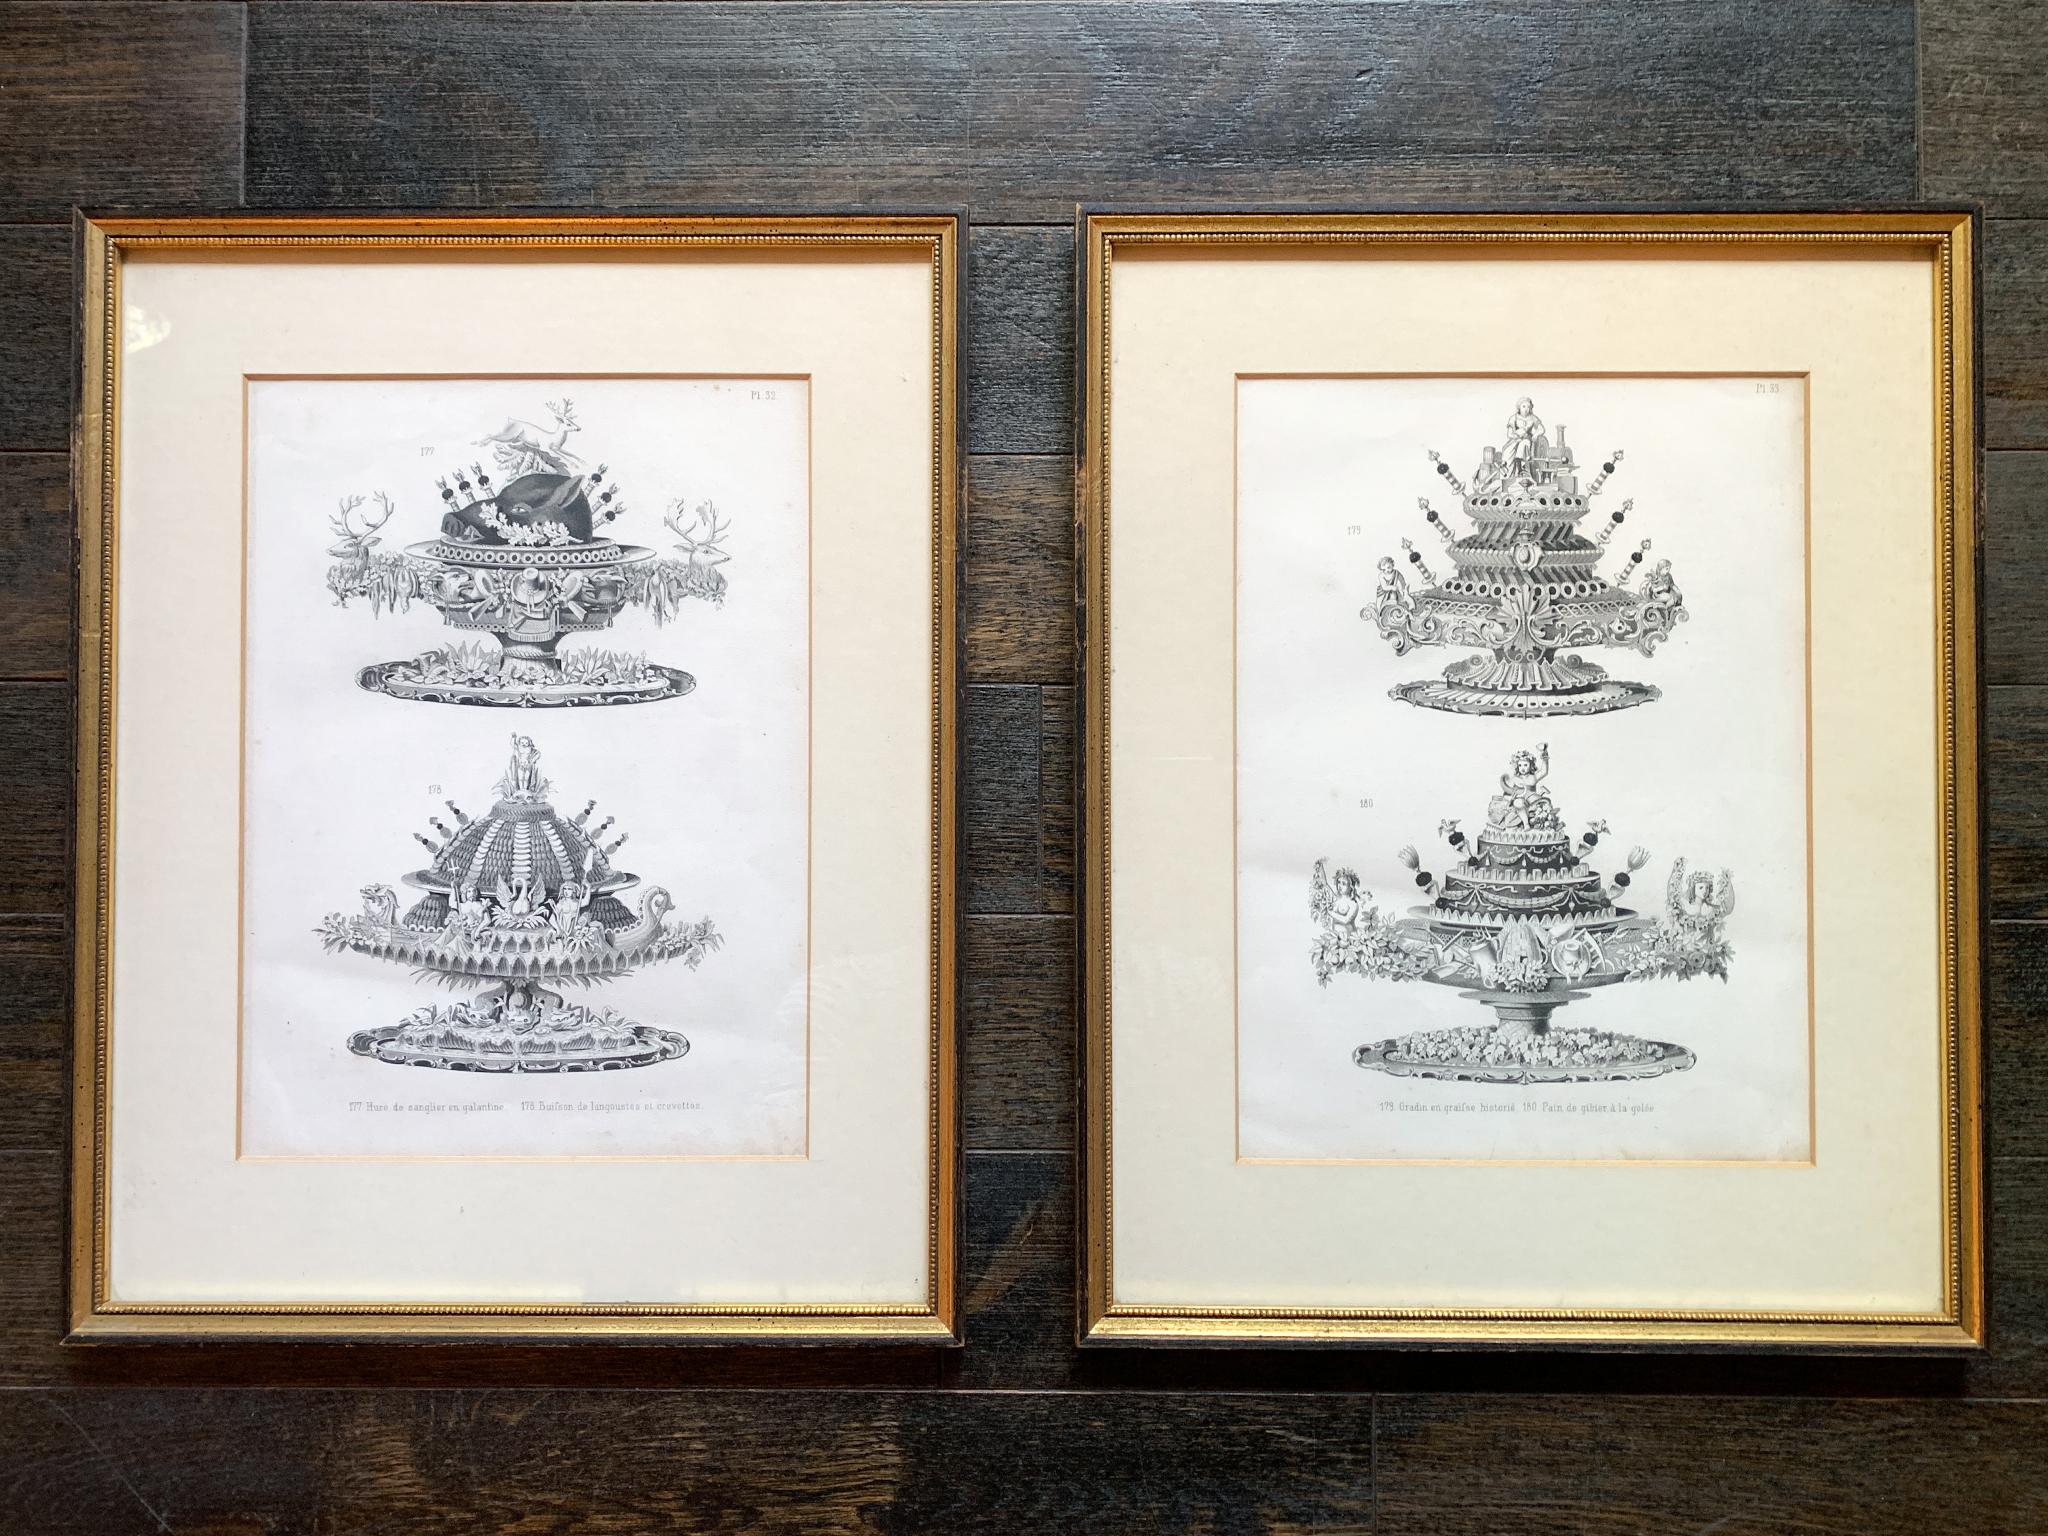 A set of 4 black-and-white engravings from the book La Cuisine Classique by chefs Émile Bernard and Urbain Dubois. Published in the 19th Century, the illustrations depict elaborate cuisine and centerpieces. Two engravings come in a giltwood frame,